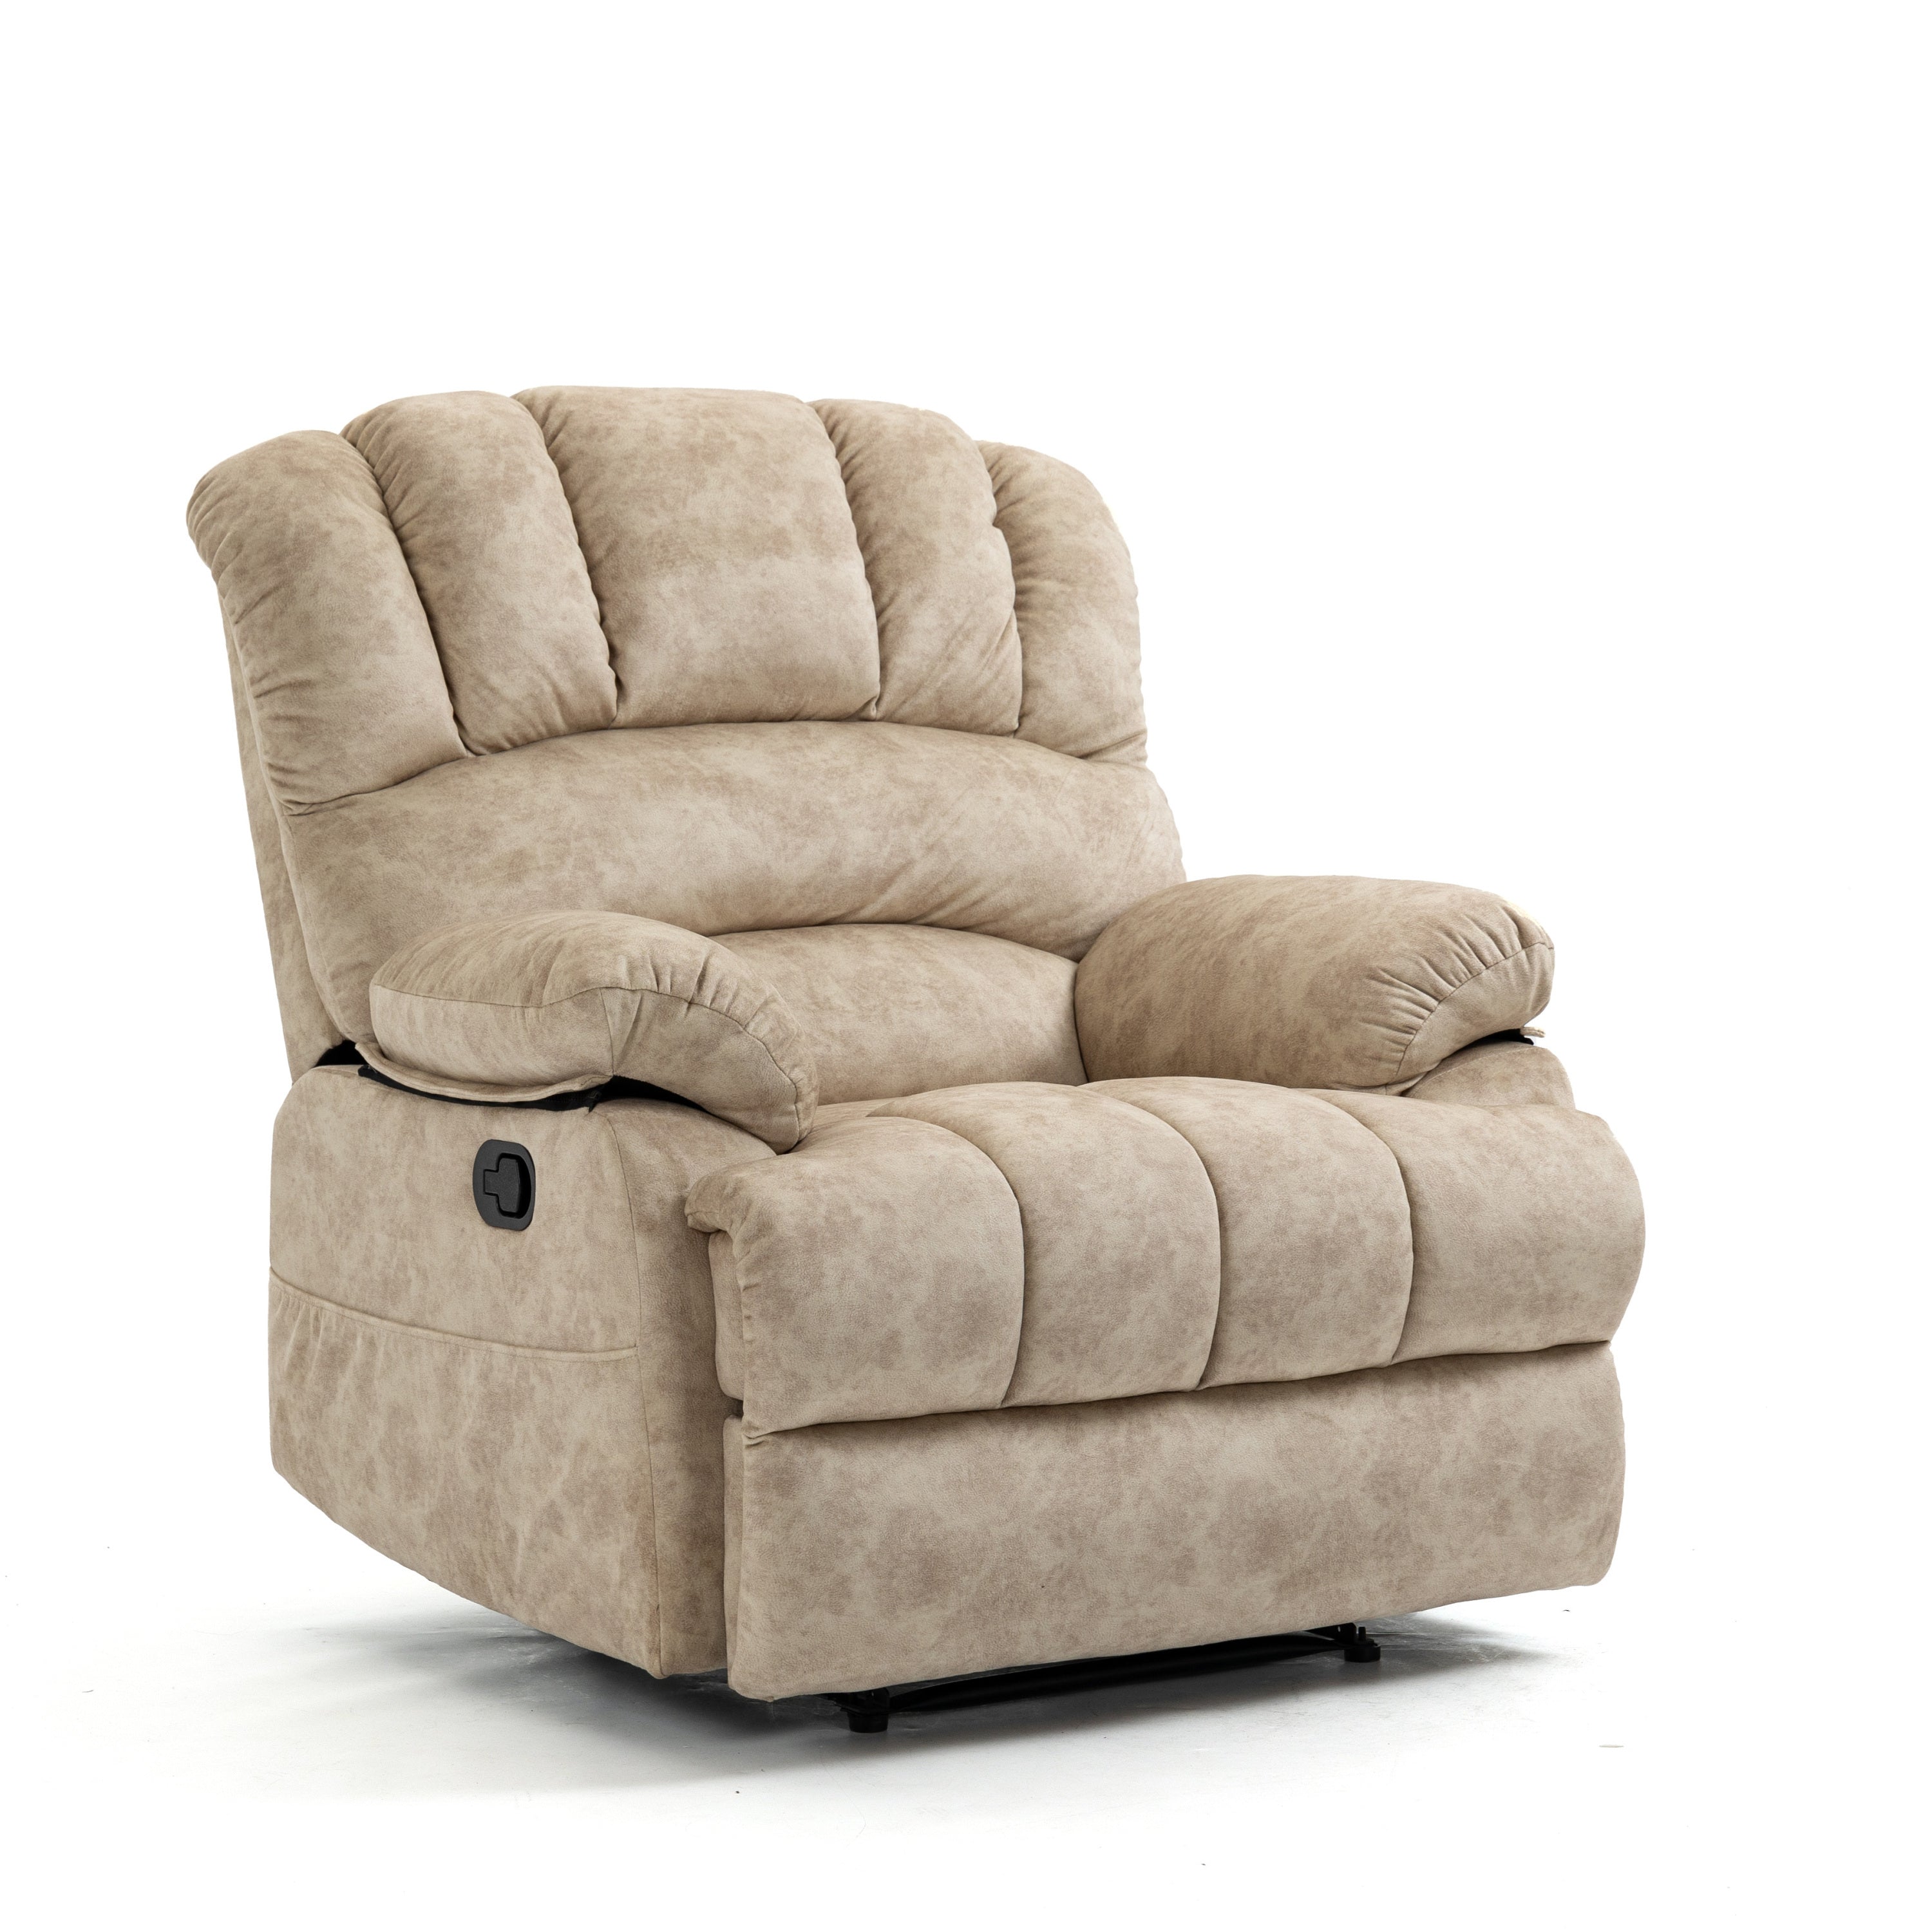 🆓🚛 Large Manual Recliner Chair In Fabric for Living Room, Beige